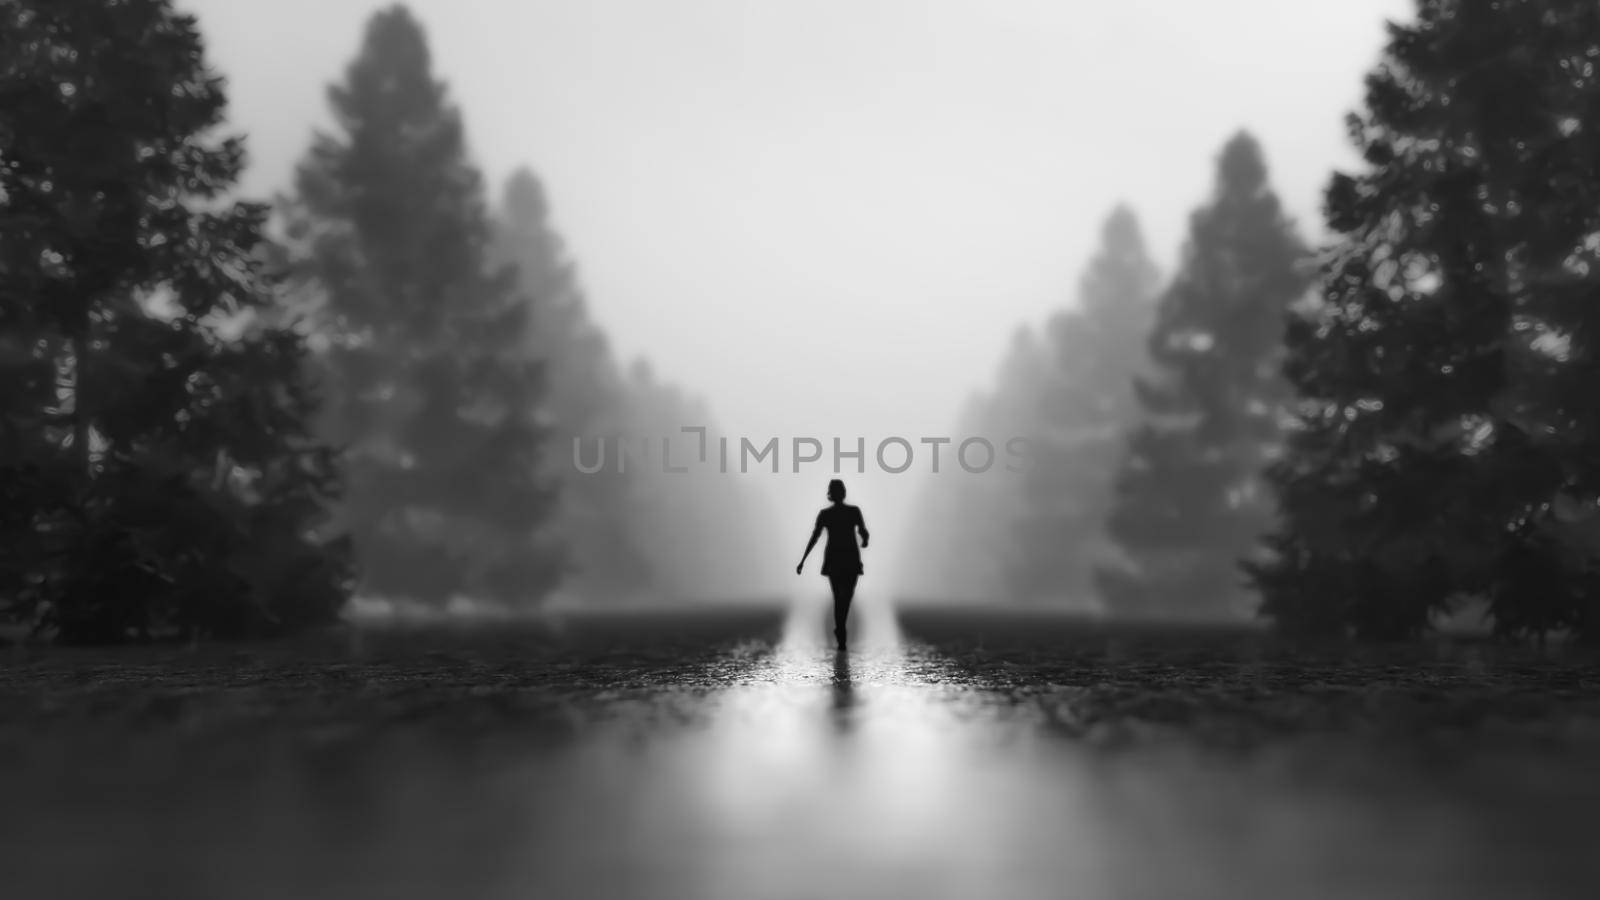 3D rendering illustration of a woman walks alone in the forest